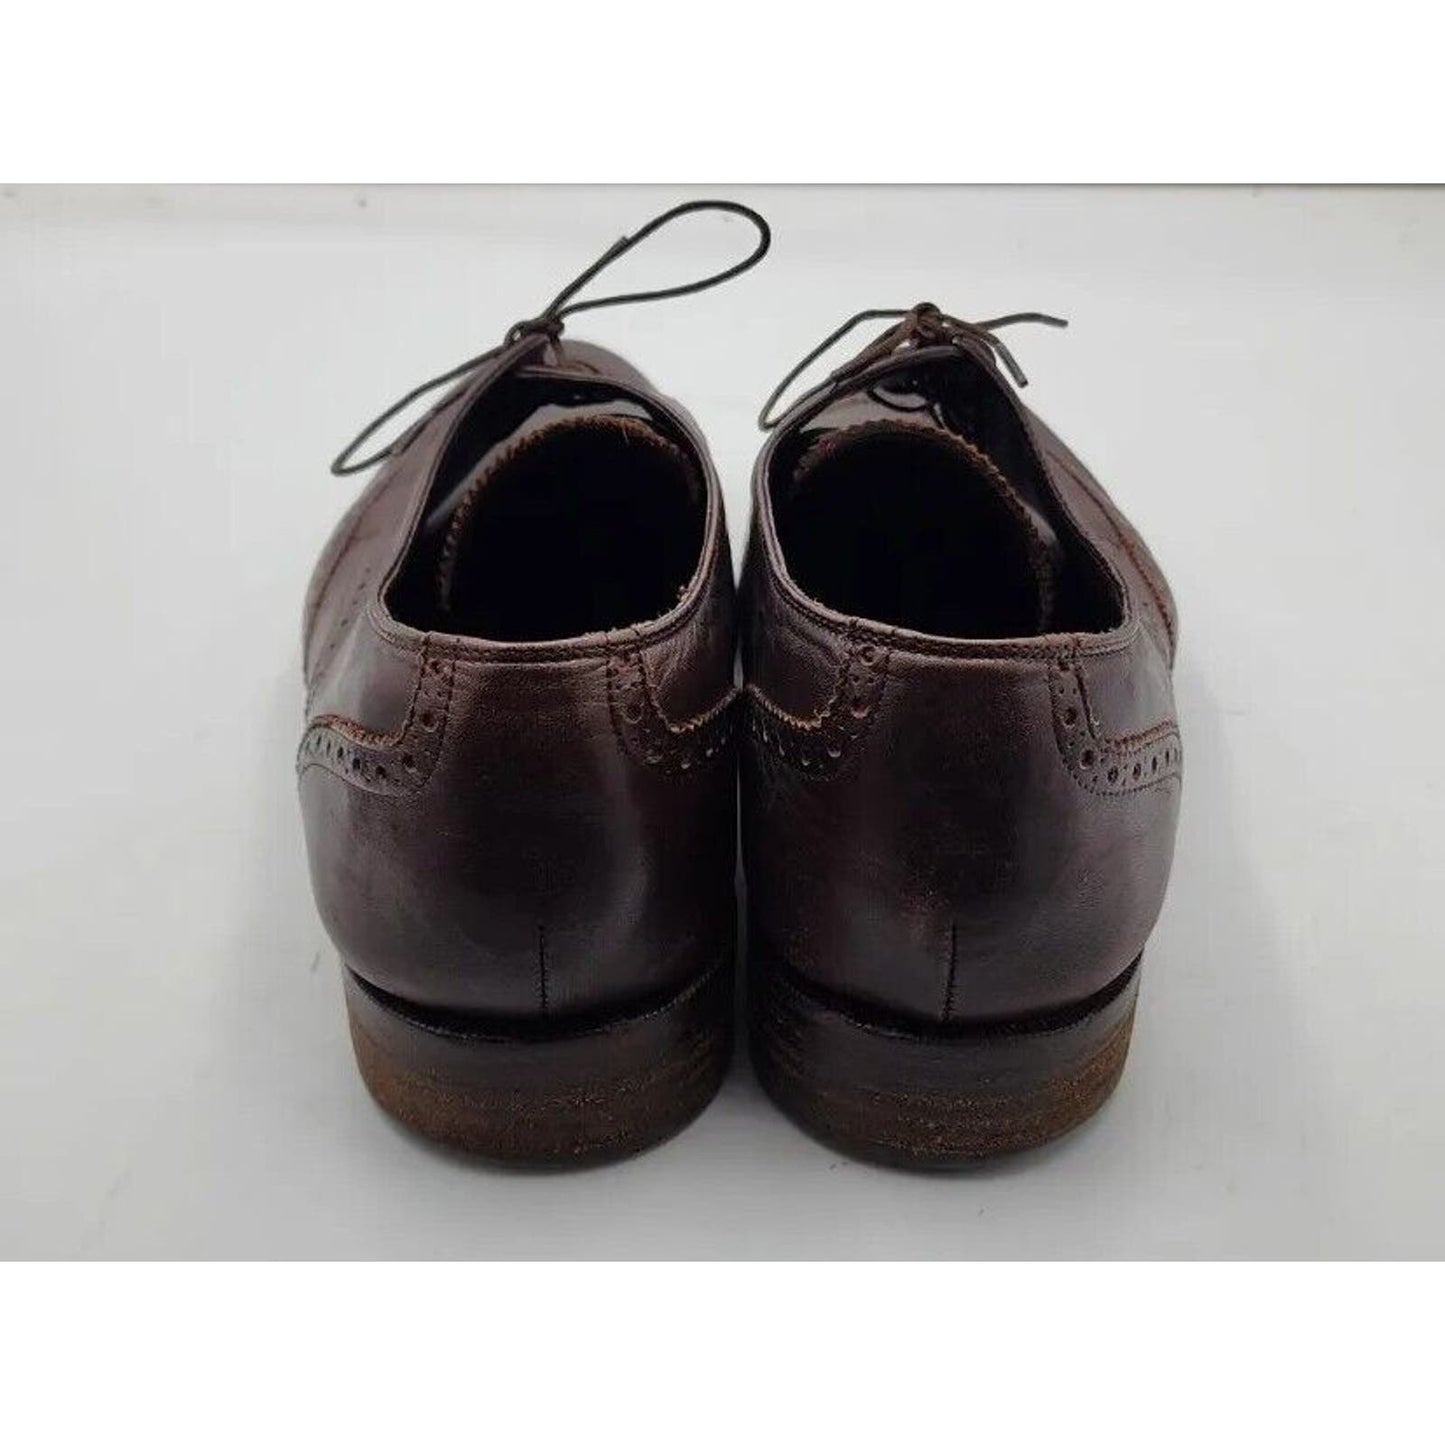 Cole Haan Grand OS Warren Dark Brown Leather Wing tip Oxfords Mens Size 12 M US